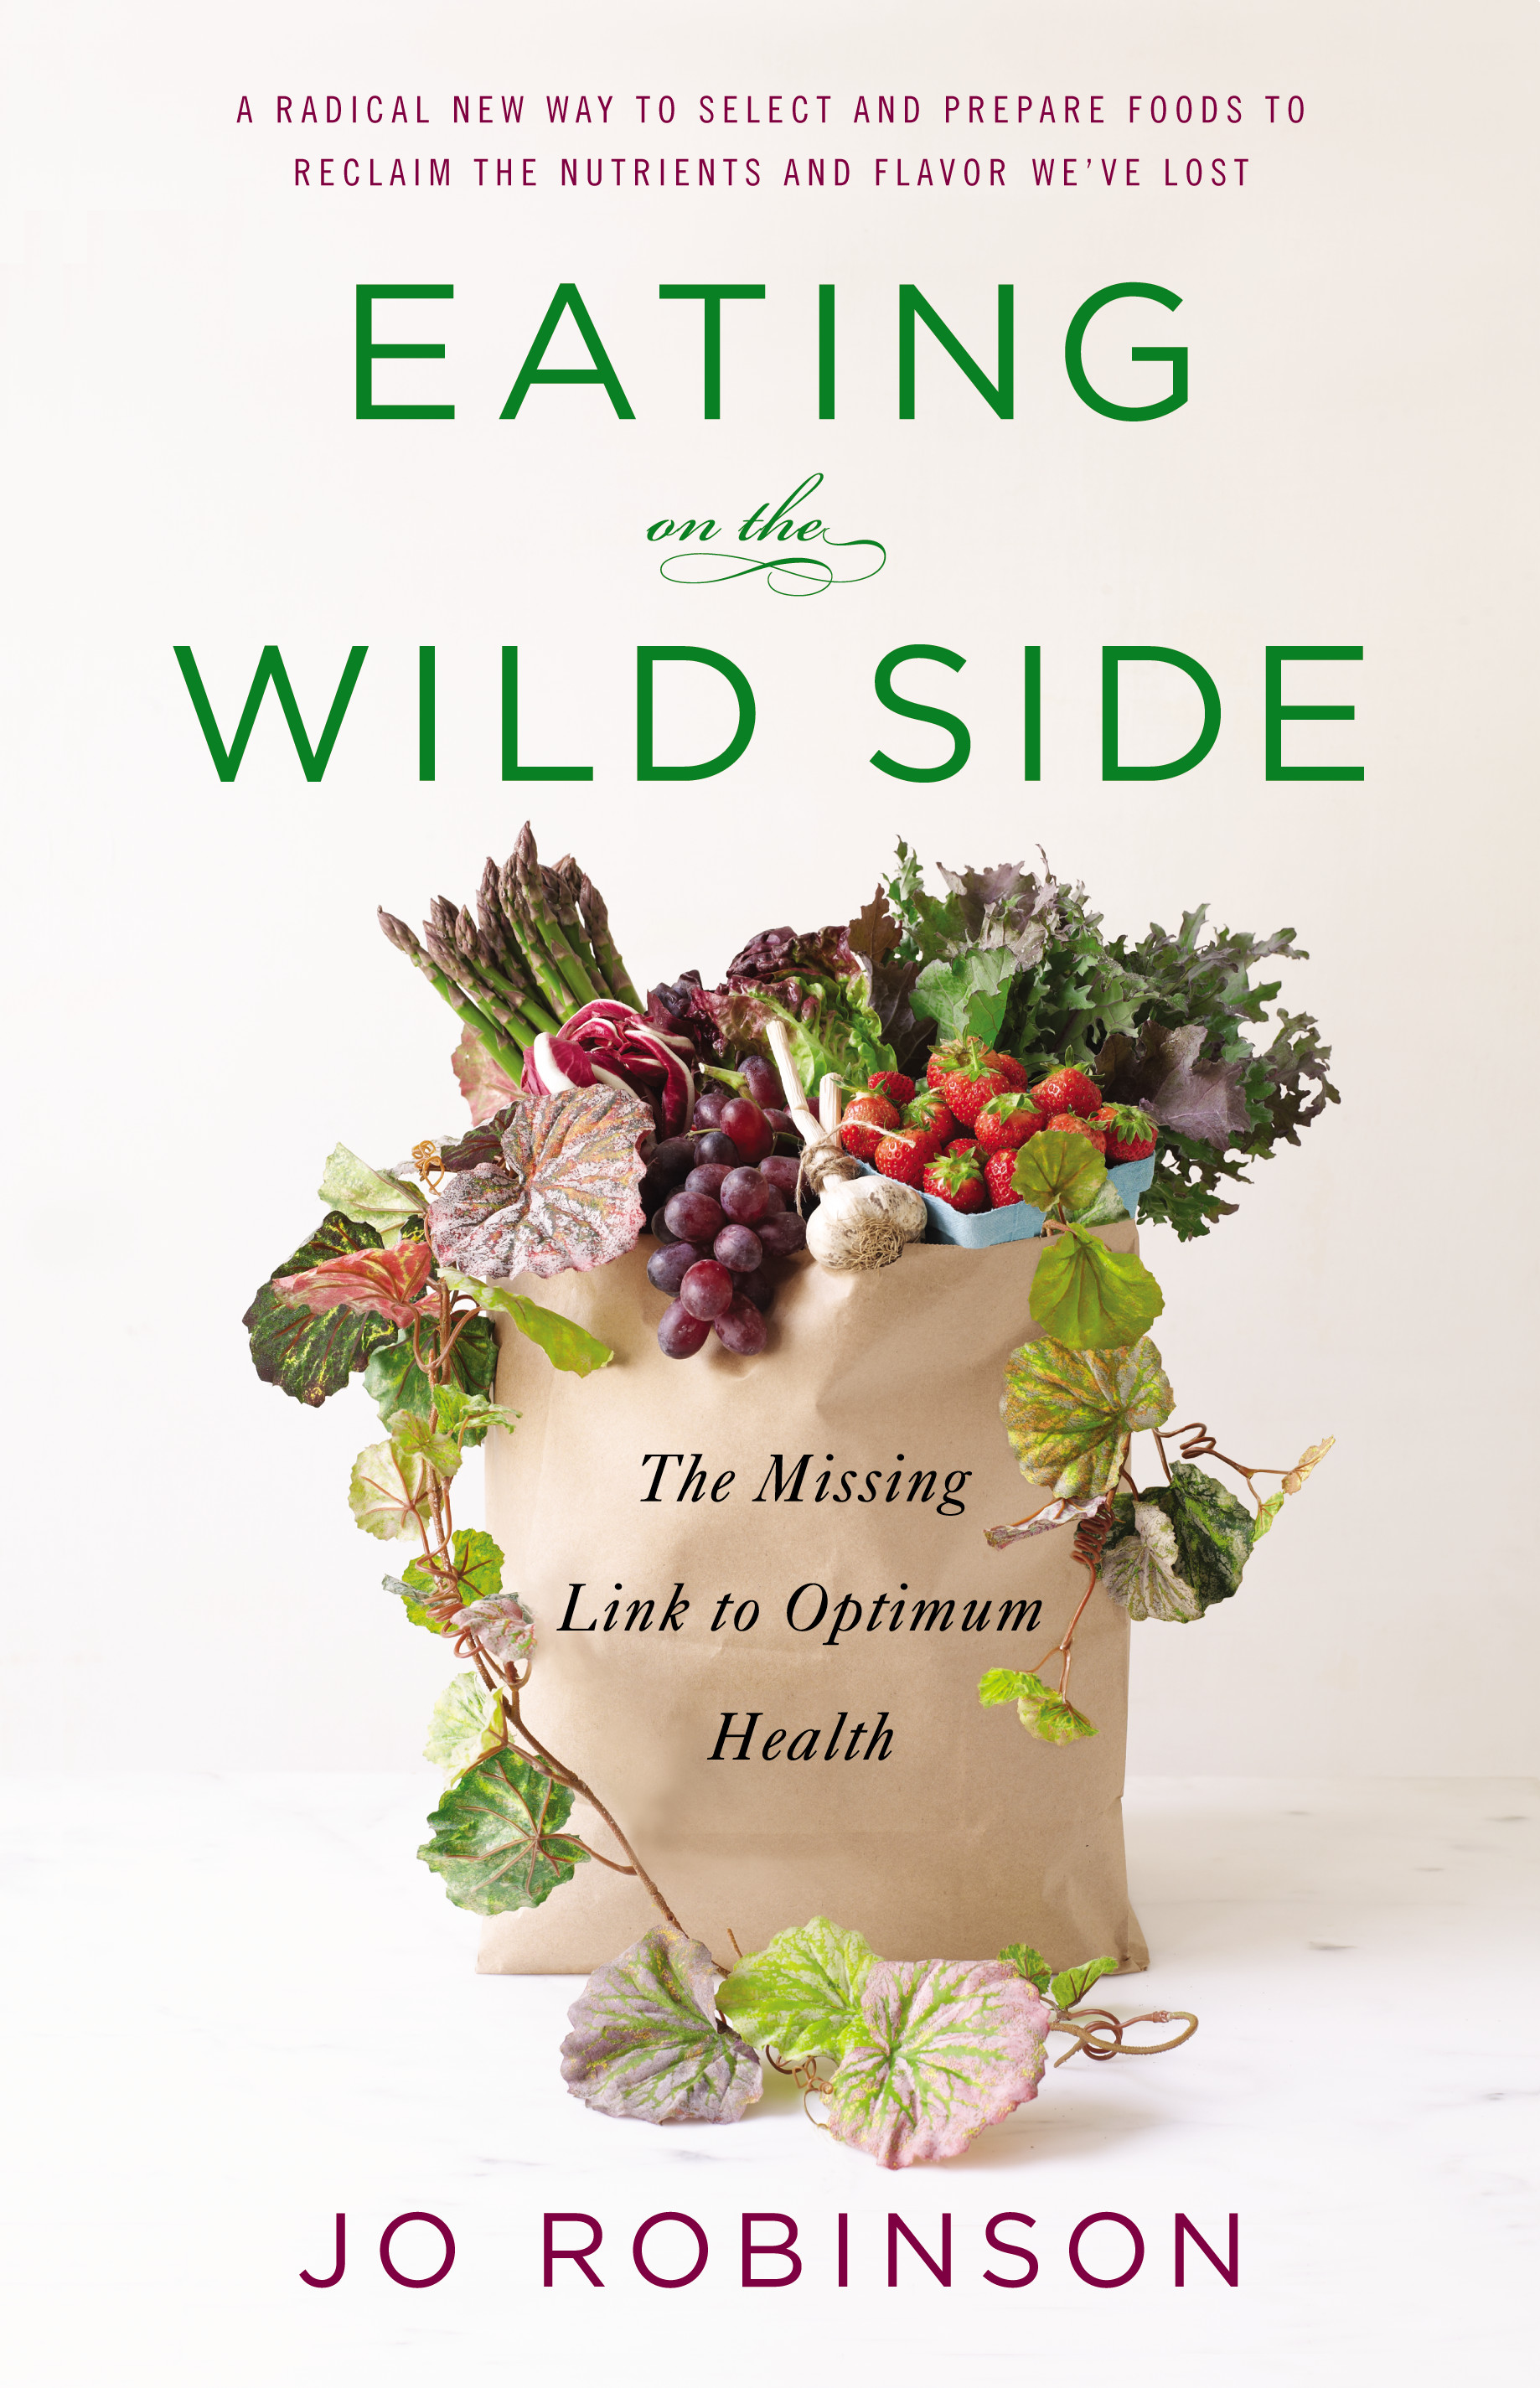 “It’s about the health benefits of the wild vegetation that’s been filtered from our diets.” $13, barnesandnoble.com